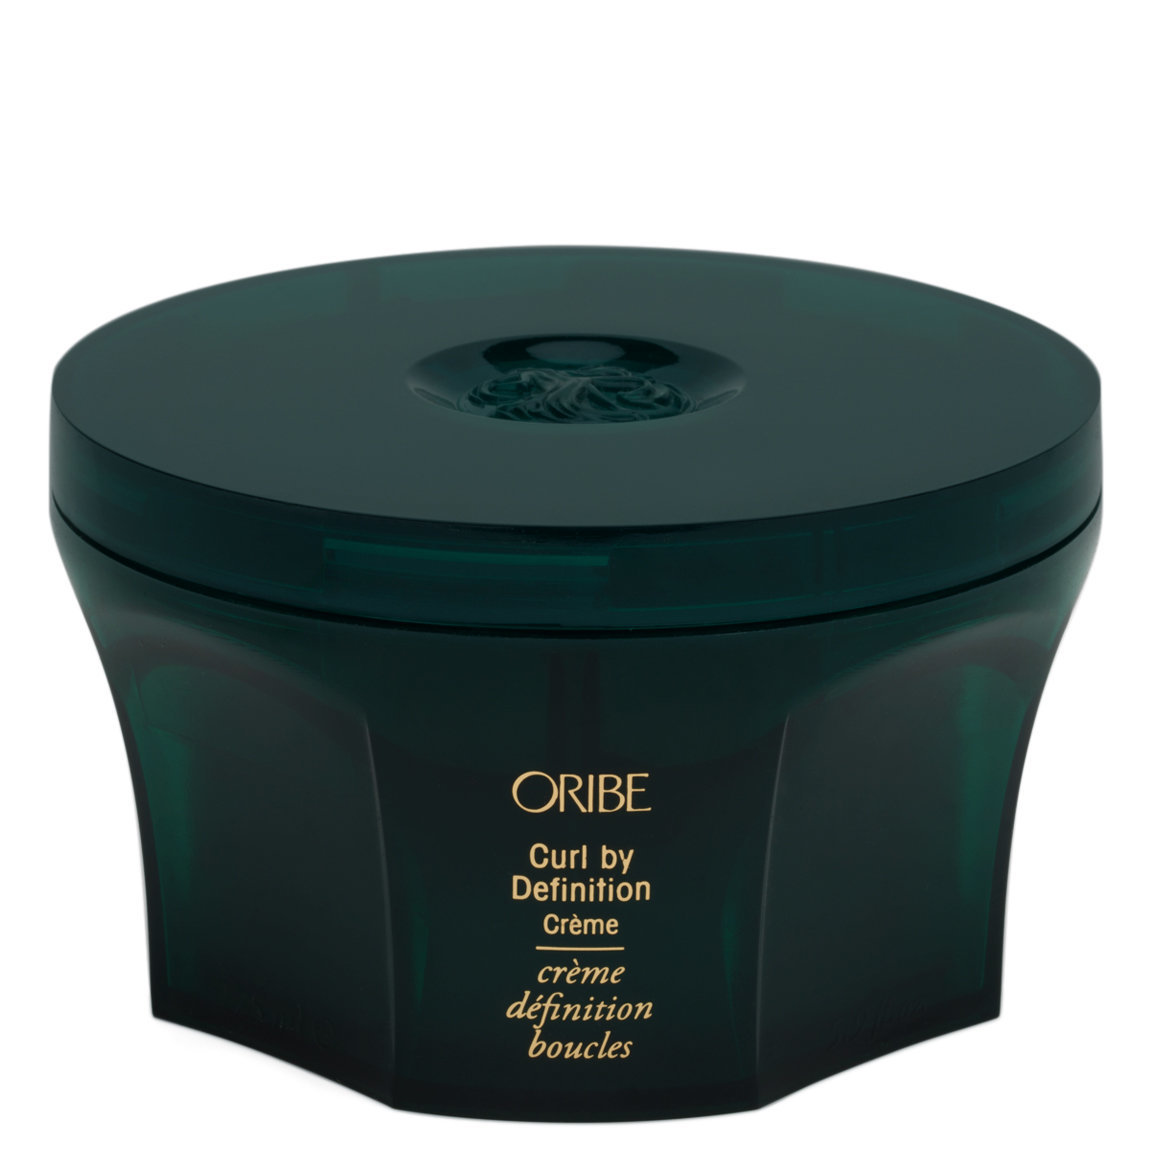 oribe curl by definition review